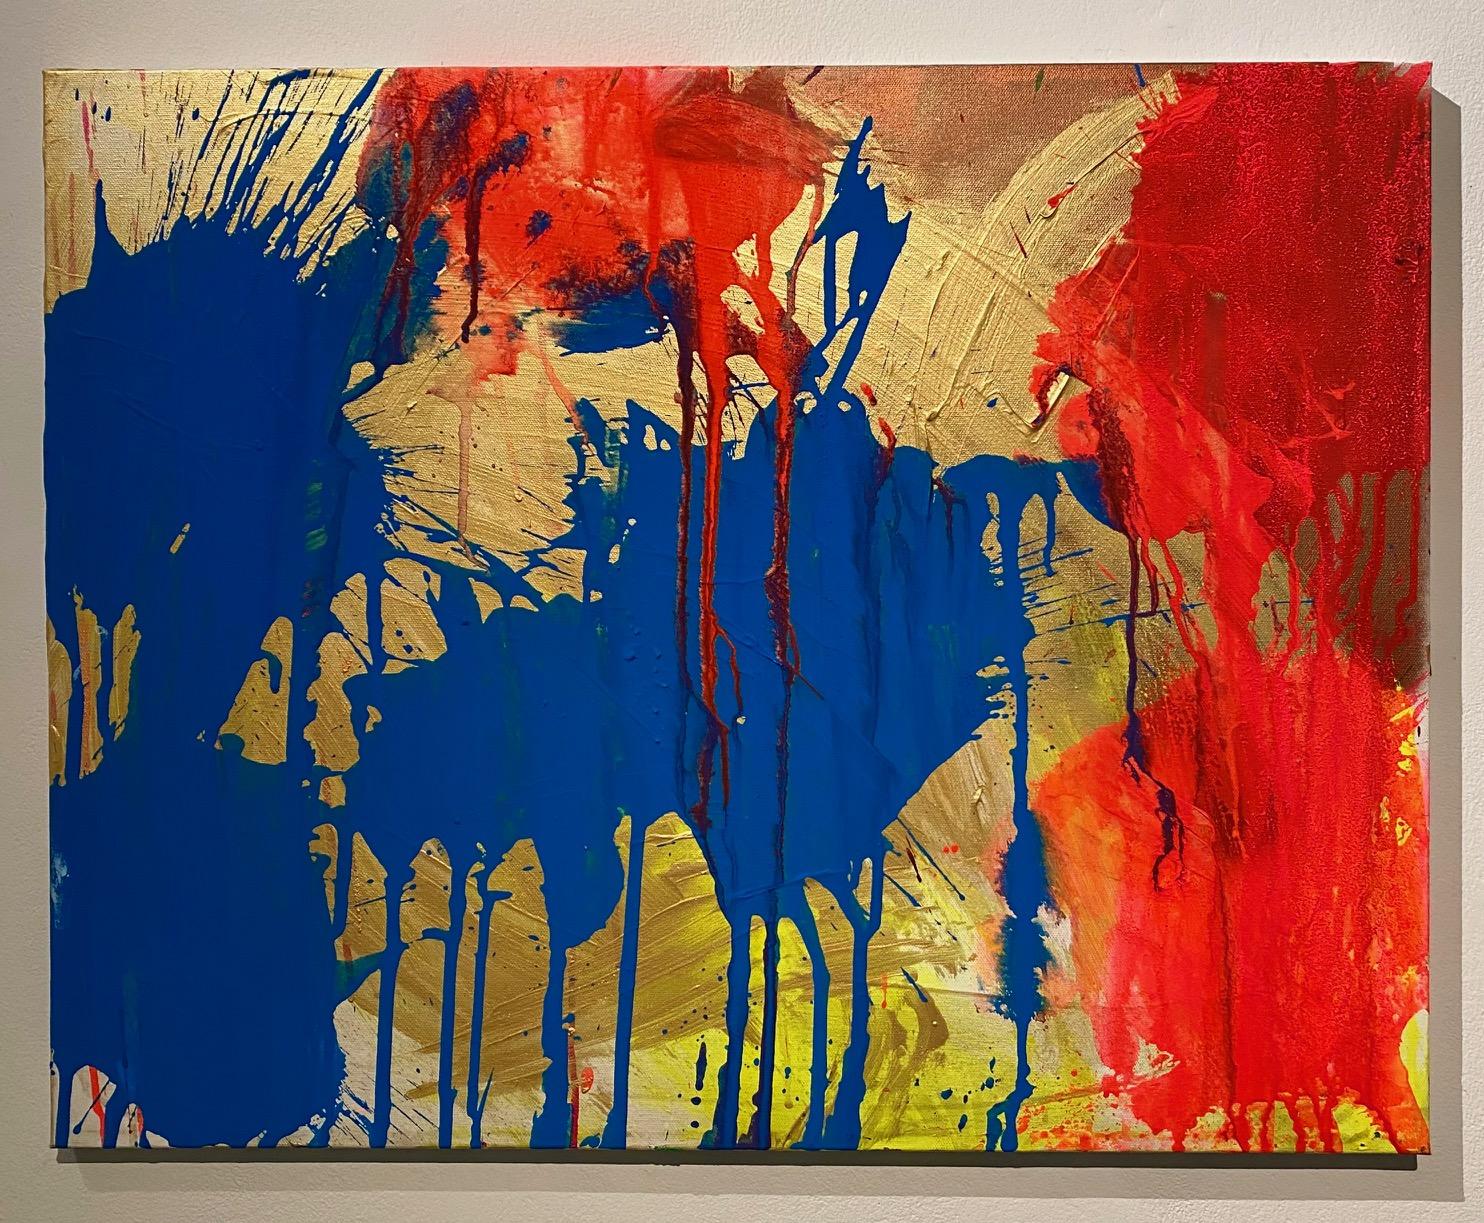 Abstract Painting Ushio Shinohara - « Red and Blue on Gold », peinture acrylique sur toile - Peinture abstraite de boxe